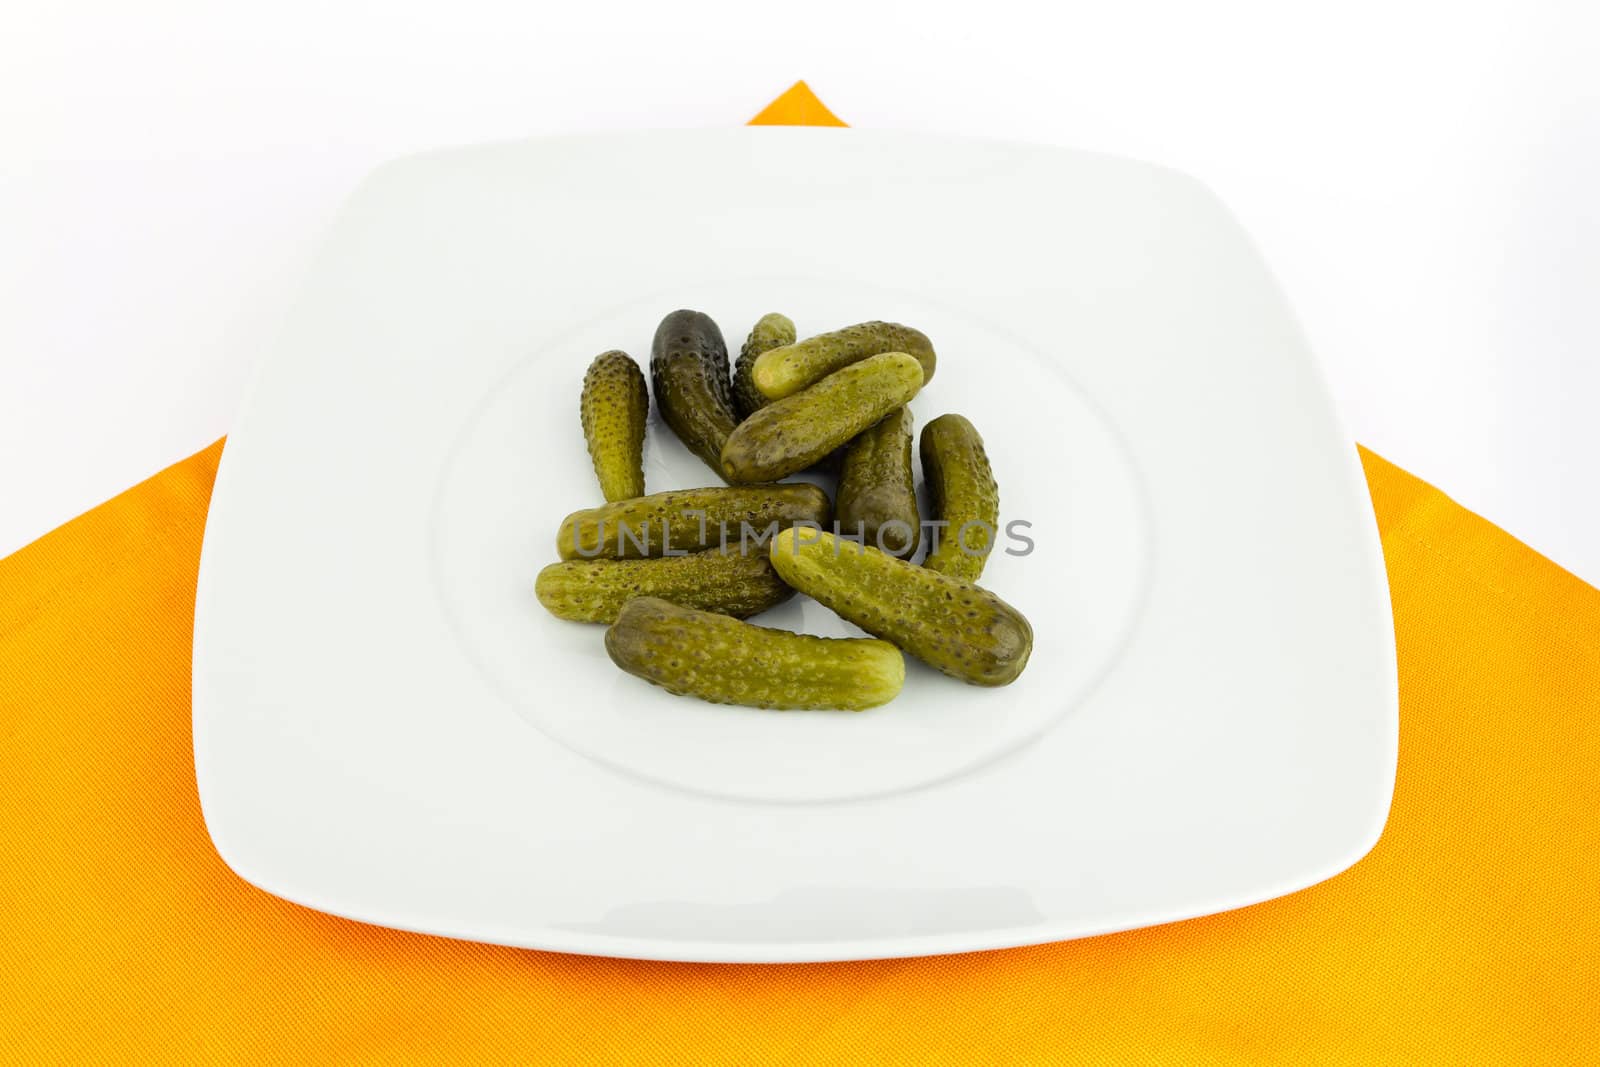 Pickled cucumbers in dish on white background.